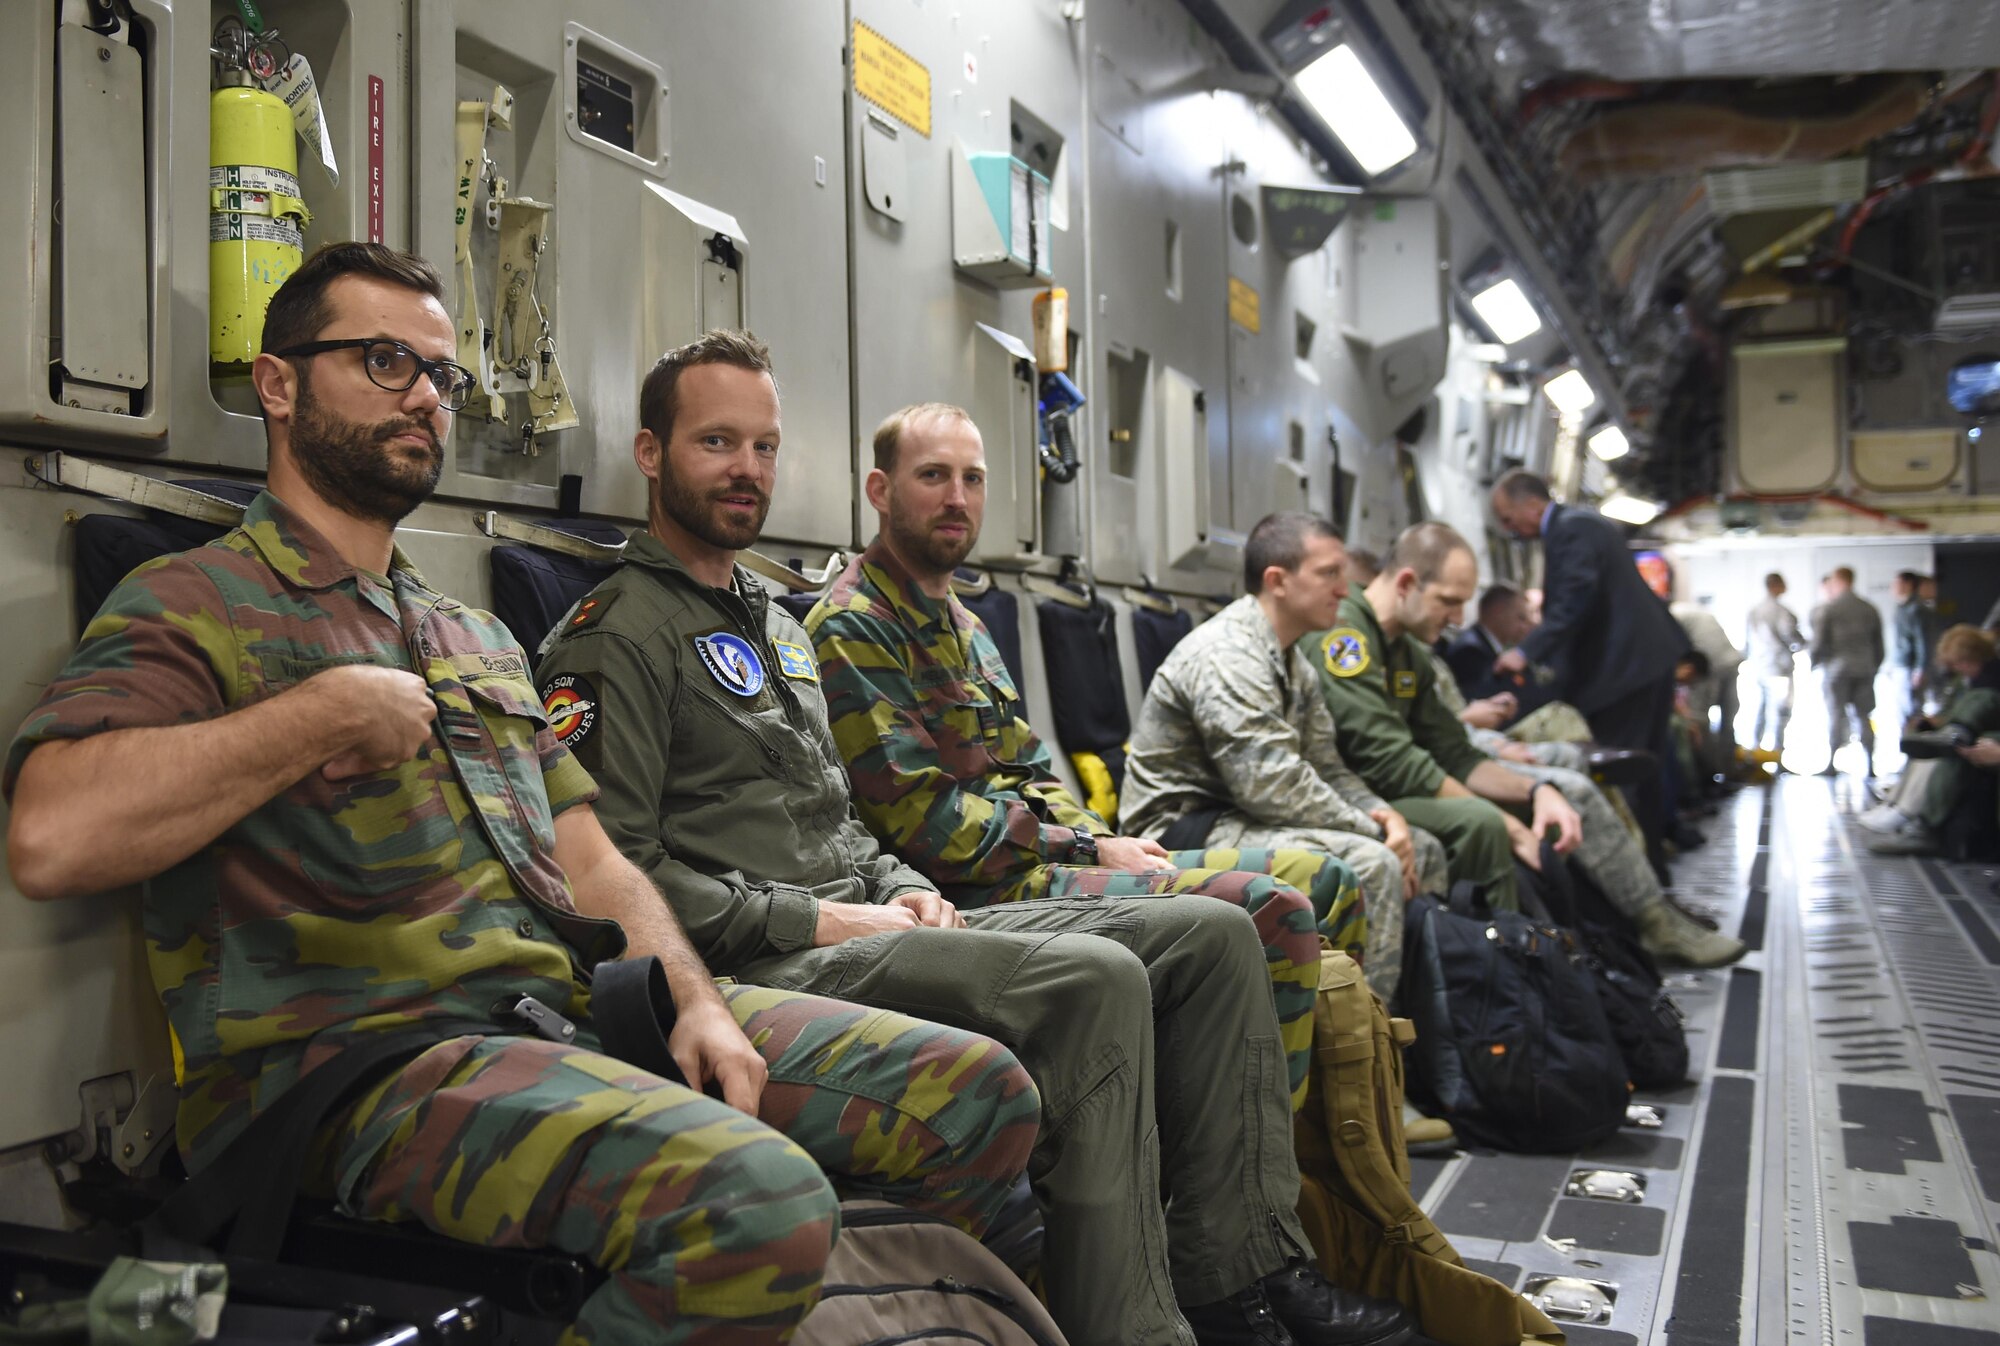 A Belgium air crew sit on board a McChord C-17 Globemaster III on the McChord Field flight line before departing to Grant County International Airport a.k.a. Moses Lake Sept. 21, 2016. Eight nations visited the base as part of Air Mobility Command’s Mobility Guardian in progress review at Joint Base Lewis-McChord, Washington. (Air Force photo/ Staff Sgt. Naomi Shipley)